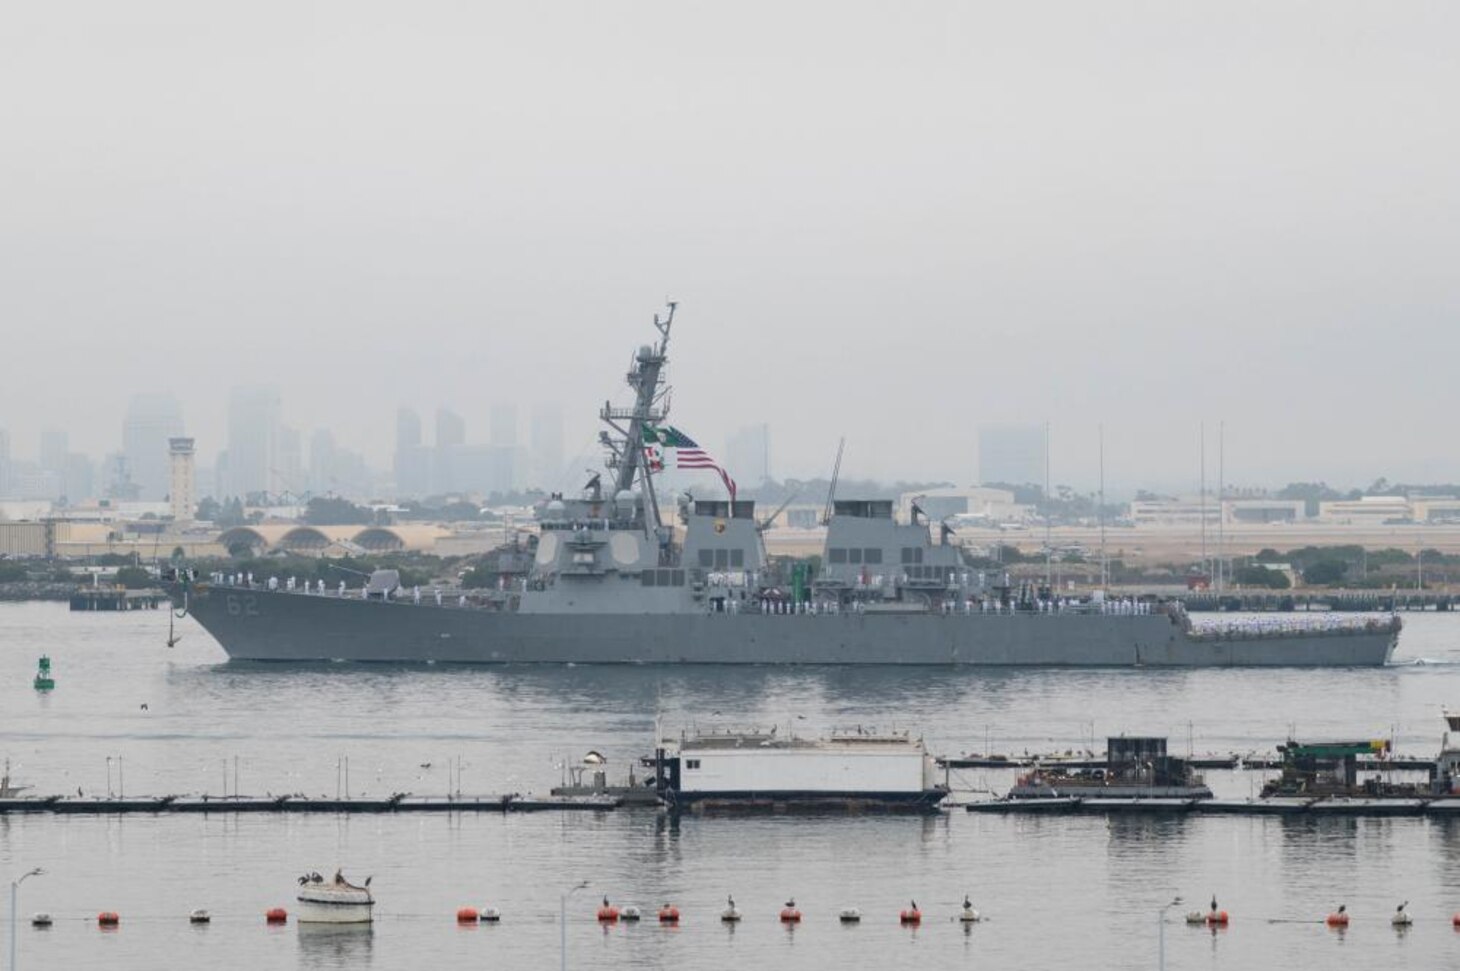 Arleigh Burke-class guided-missile destroyer USS Fitzgerald (DDG 62) returns to homeport, Aug. 23.